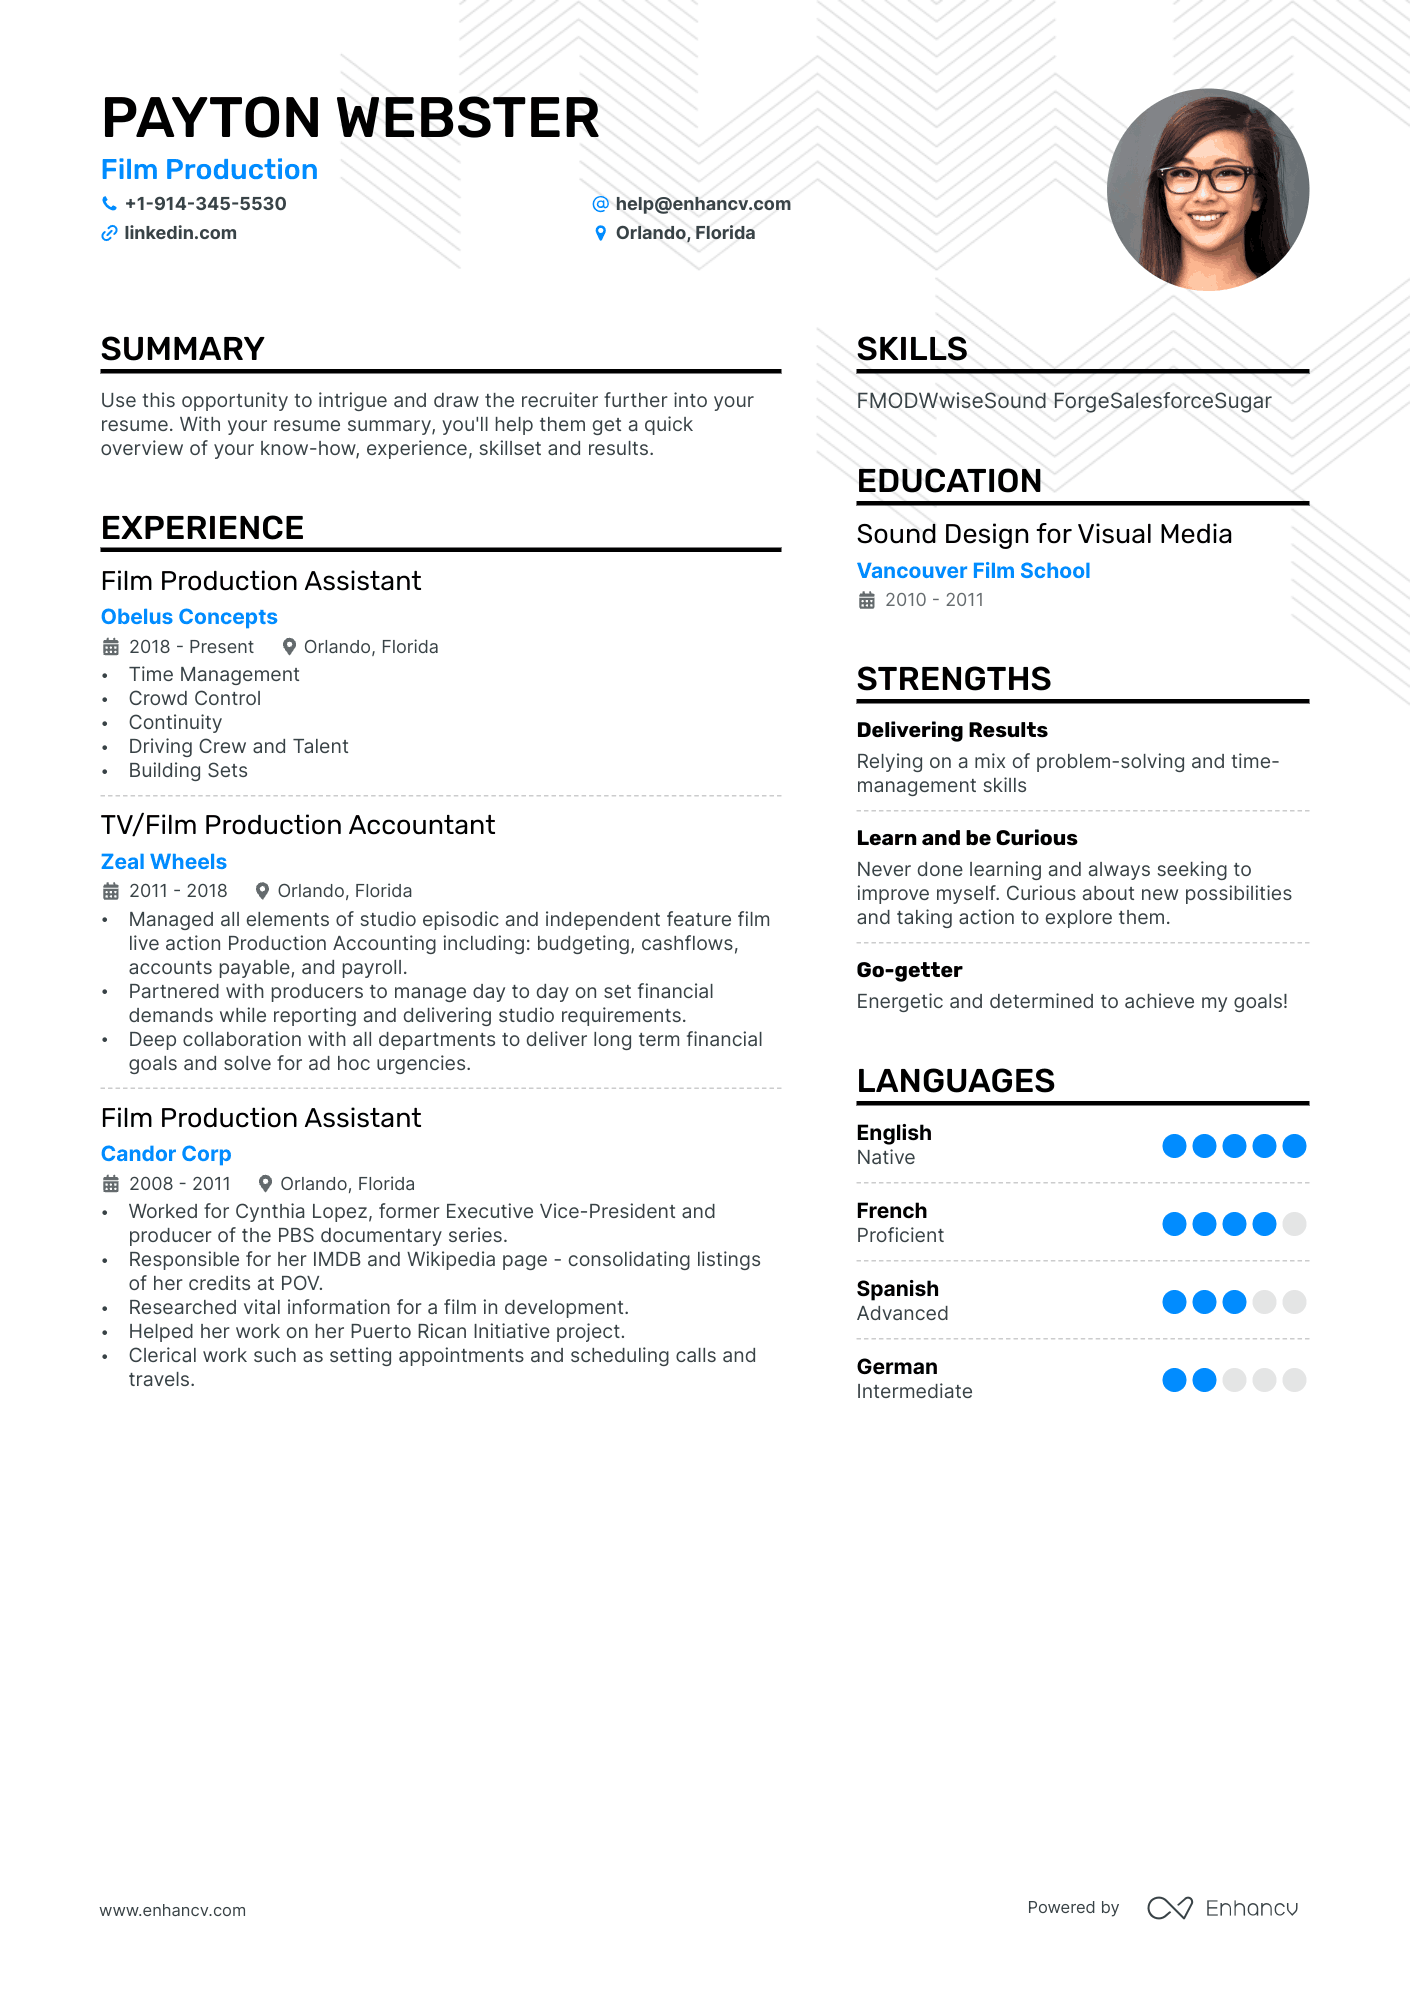 Film Production resume example